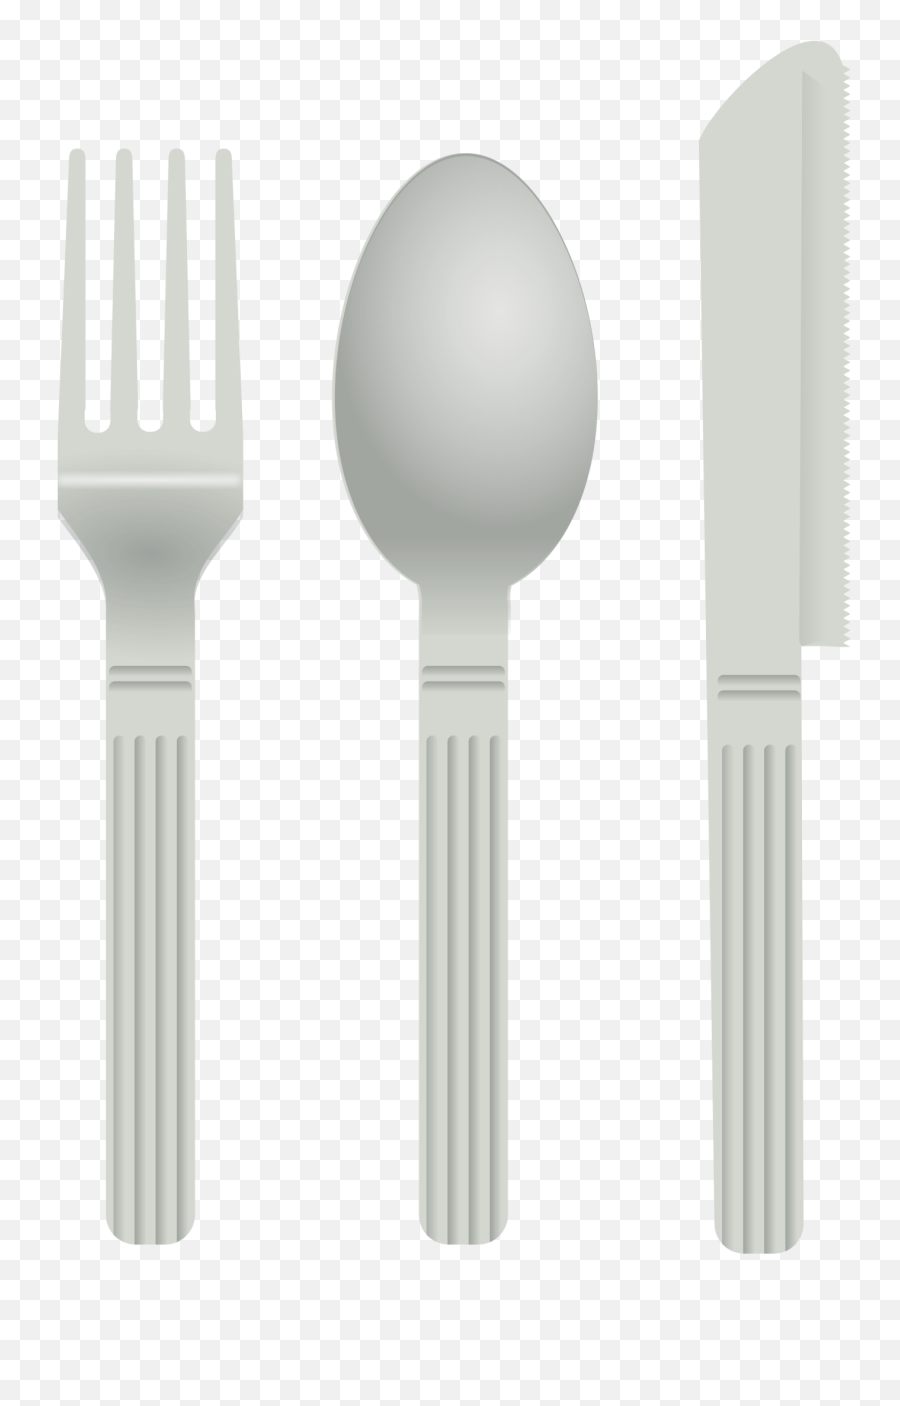 Fork Clipart Png In This 3 Piece Svg And - Fork,Minecraft Spoon Icon ...